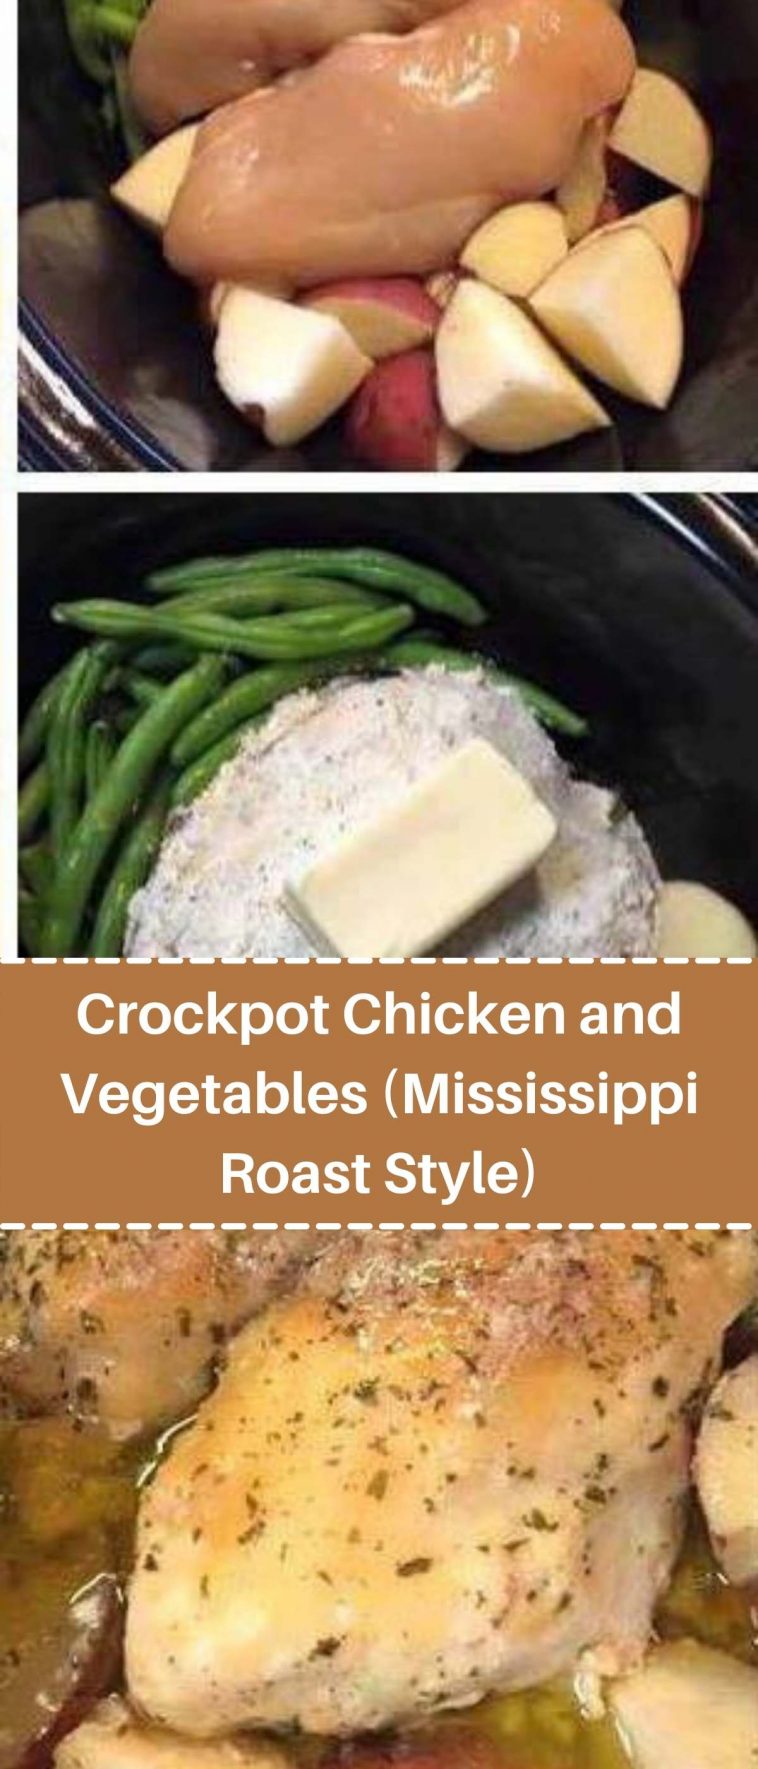 Crockpot Chicken and Vegetables (Mississippi Roast Style)